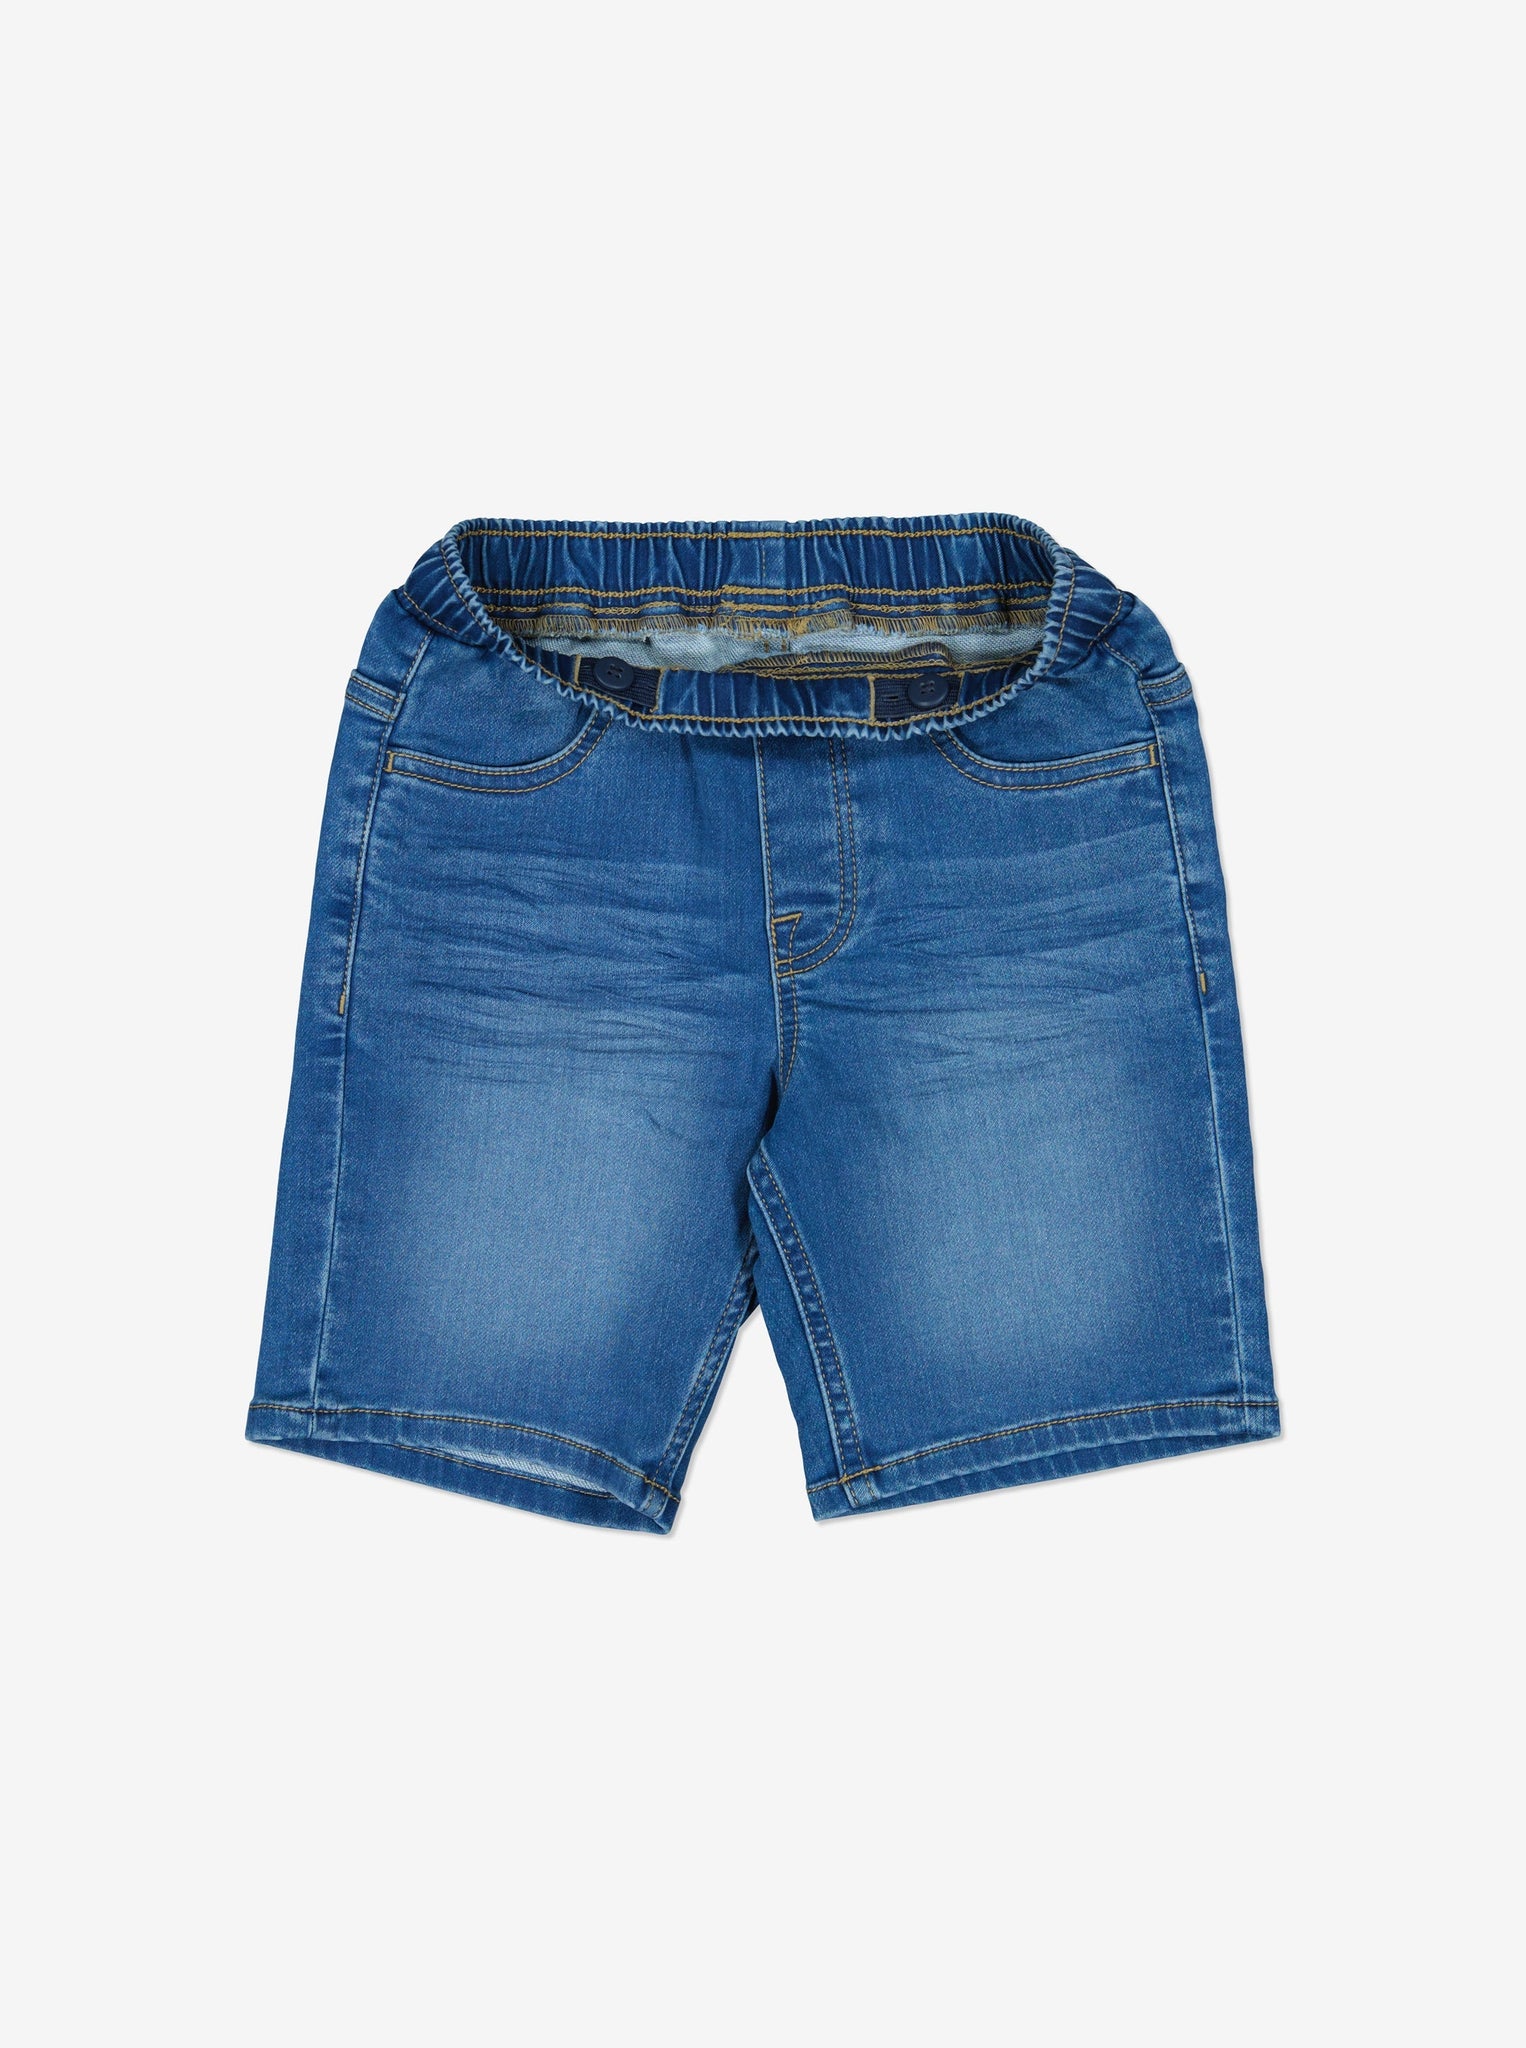 Blue Kids Denim Shorts from Polarn O. Pyret Kidswear. Made using sustainable sourced materials.